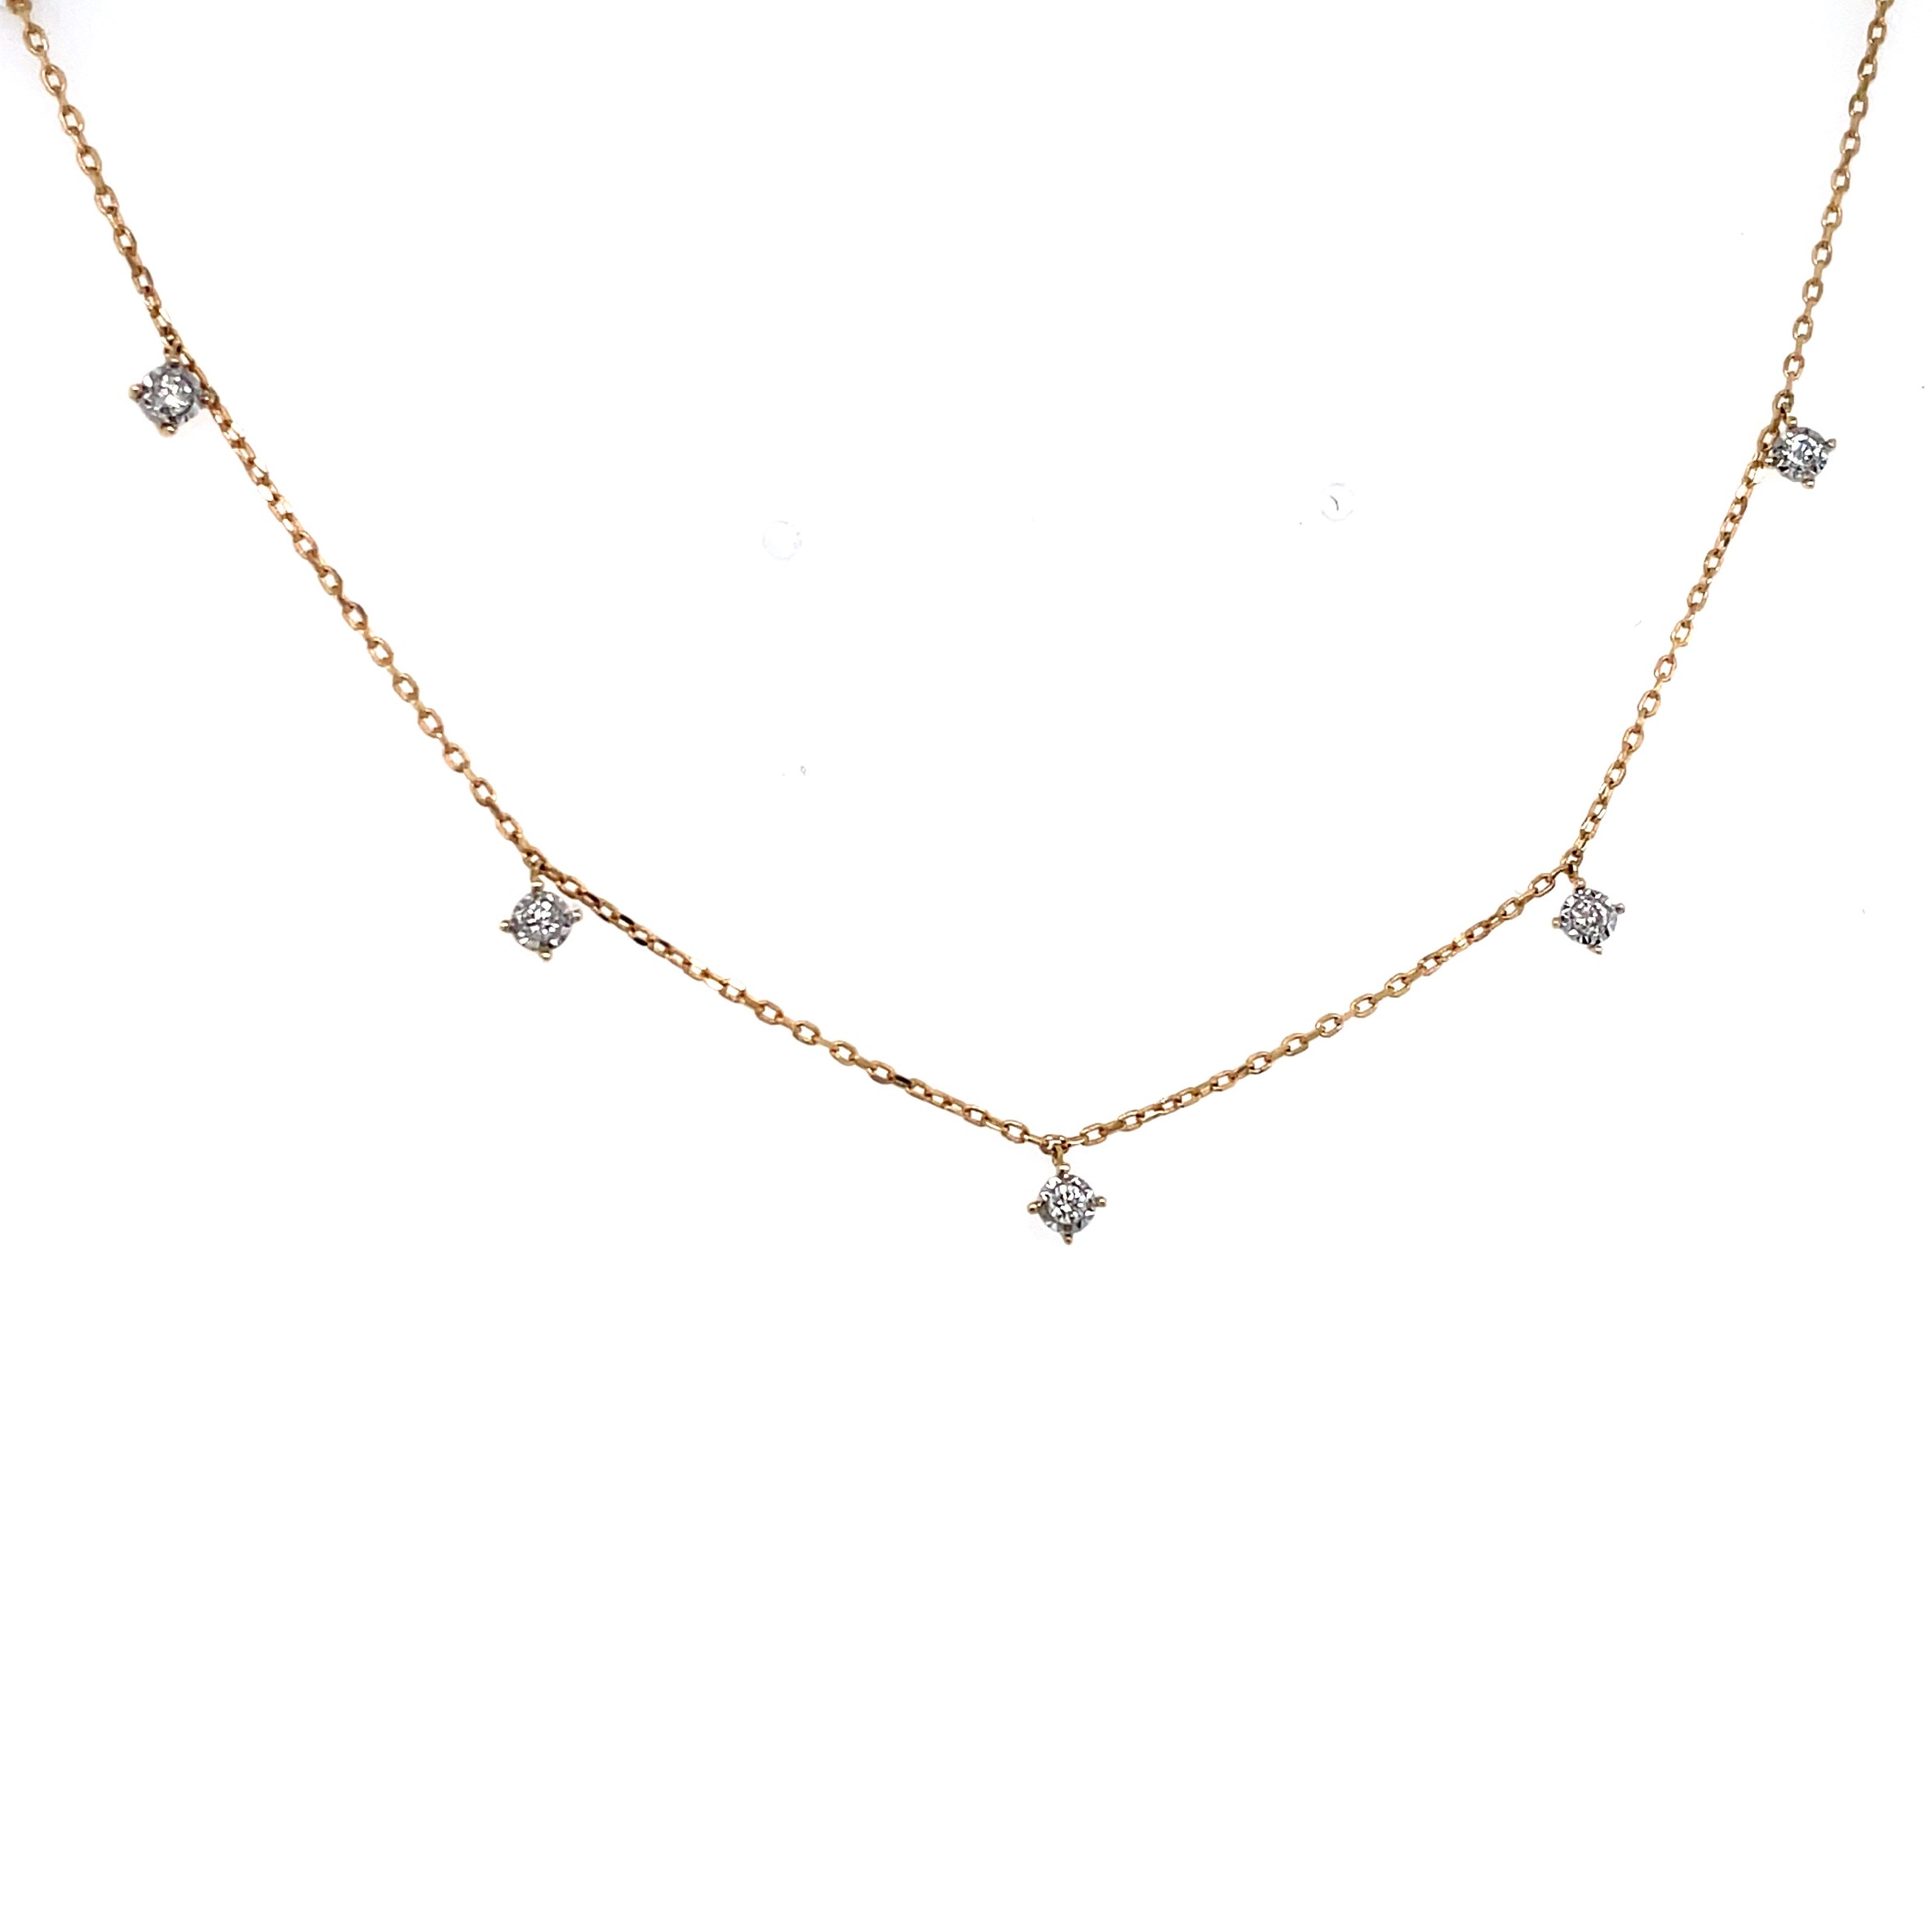 Gold Station Necklace with Diamond Drops